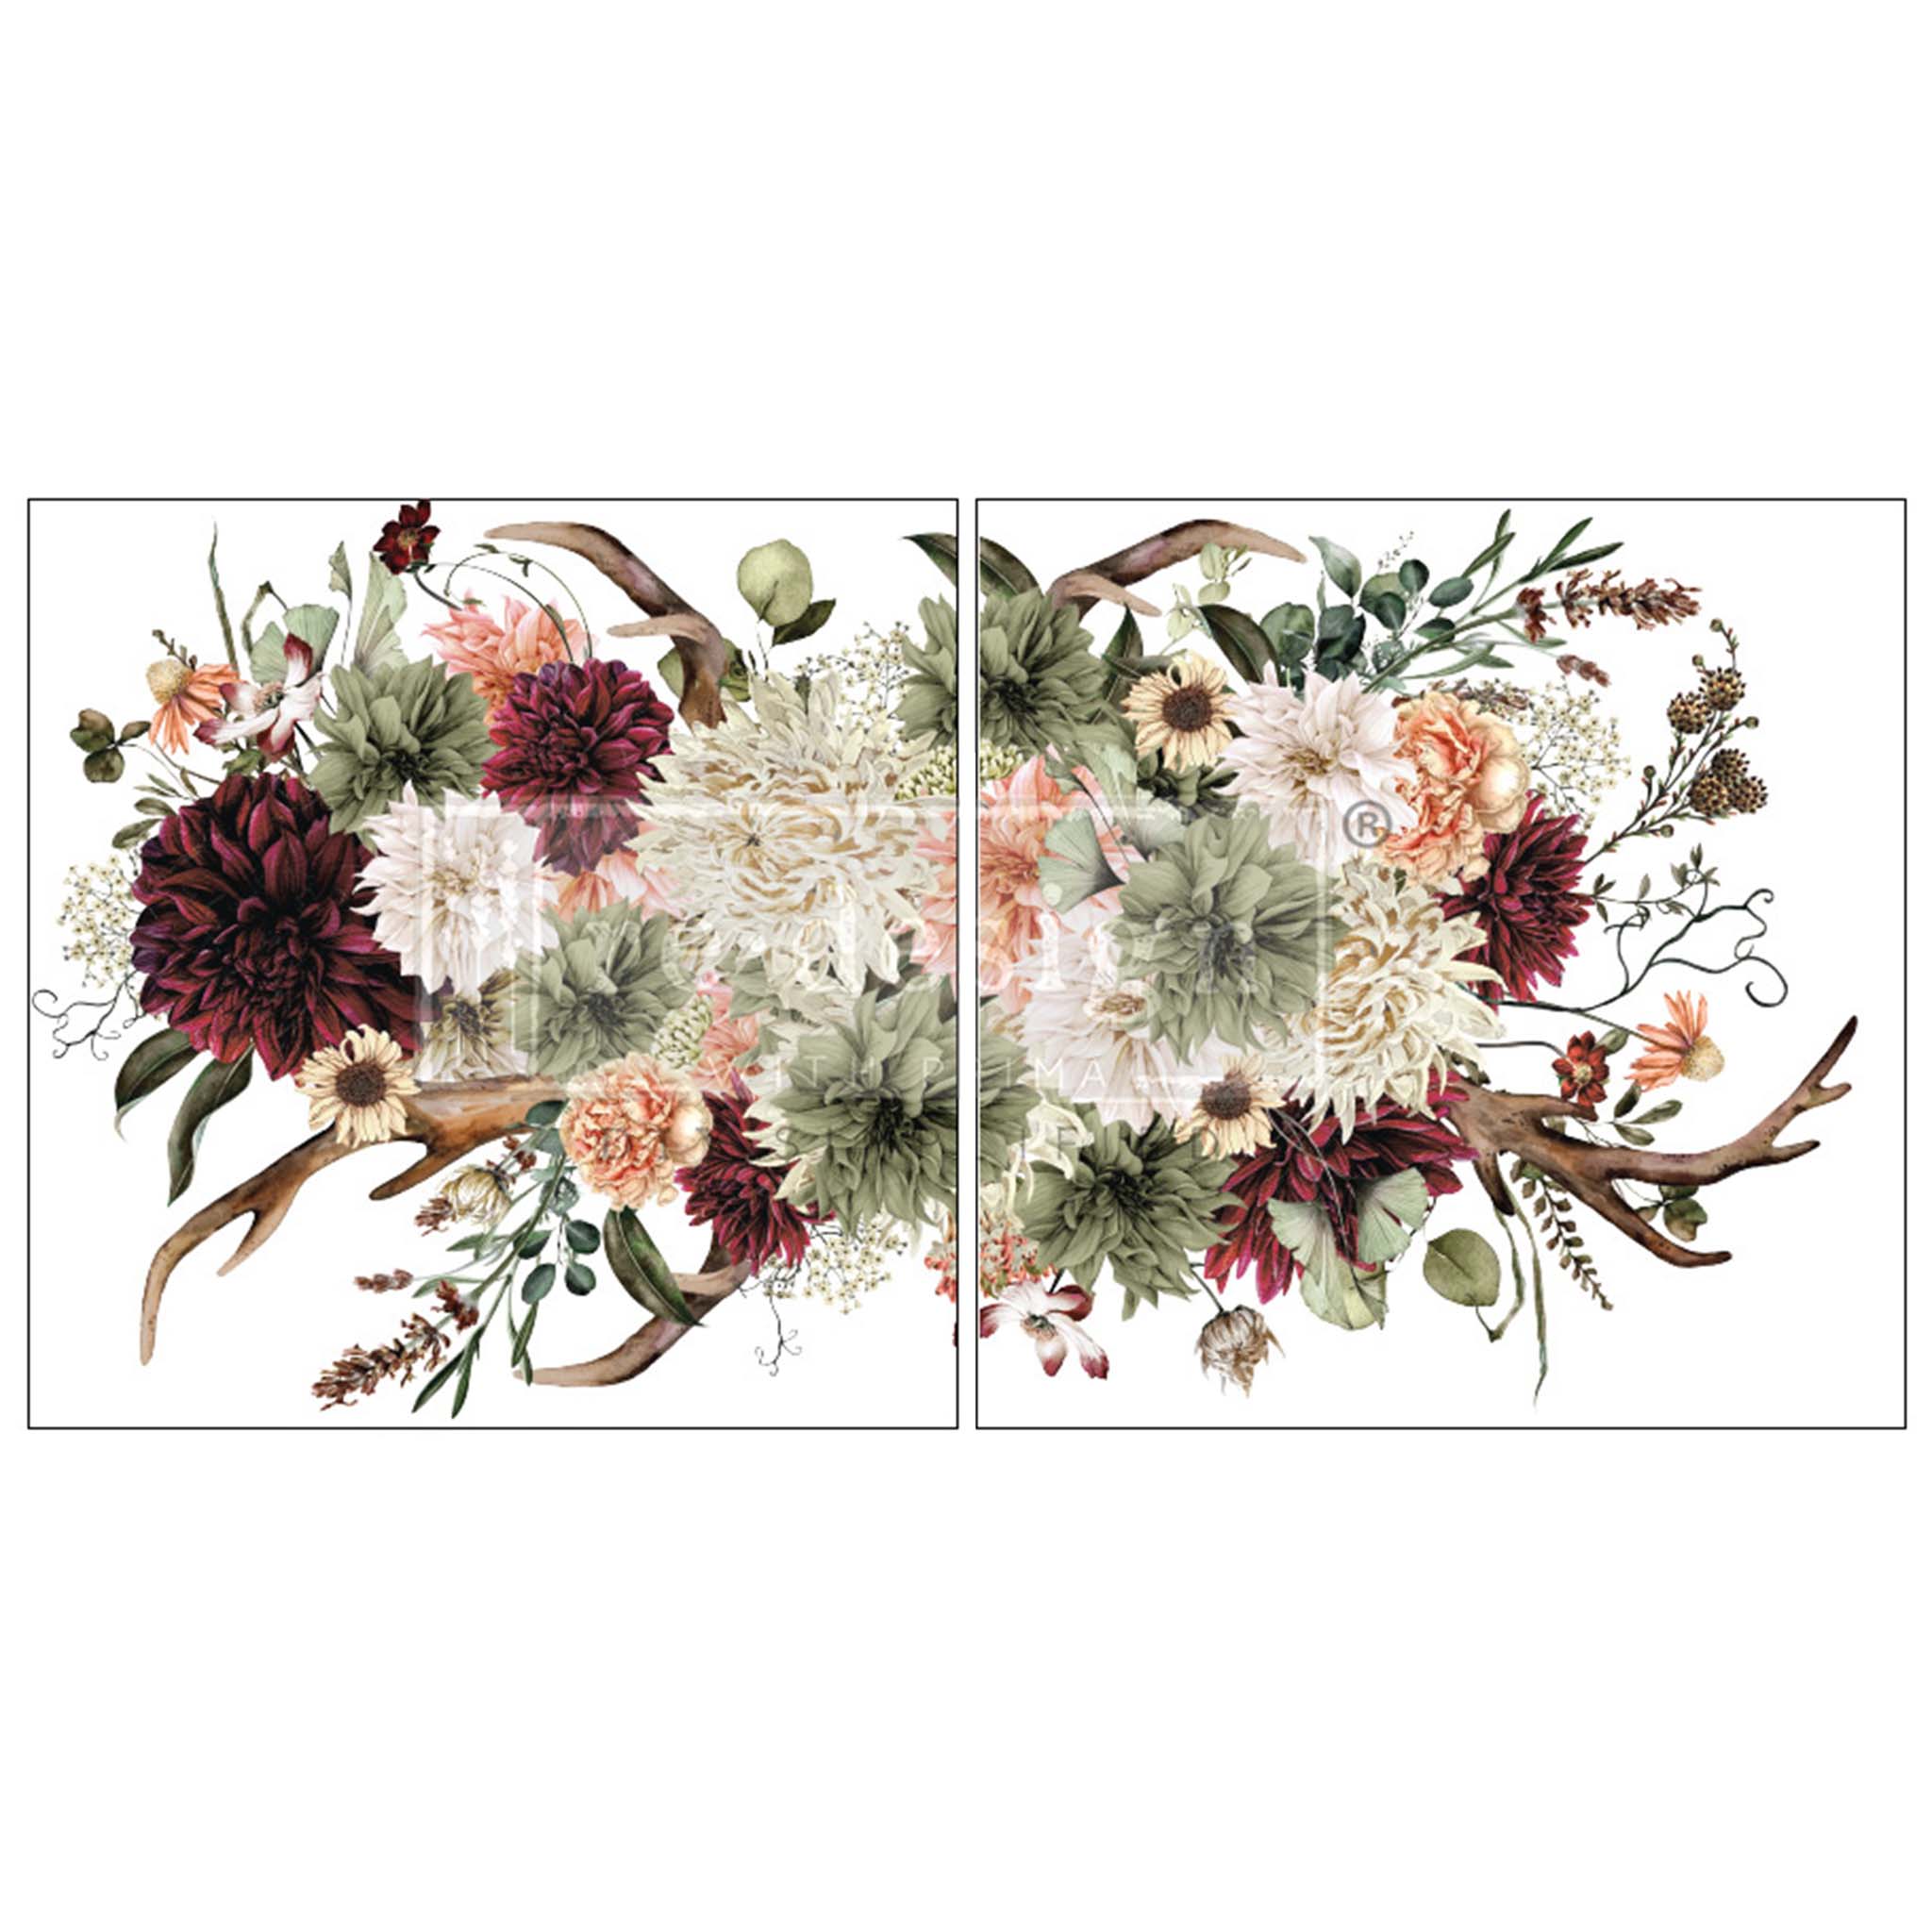 Two sheets of a rub-on transfer featuring one large floral design spread across both sheets bursting with bountiful blooms in colors of burgundy, cream, and olive peach, nestled among a beautiful bouquet of antlers.